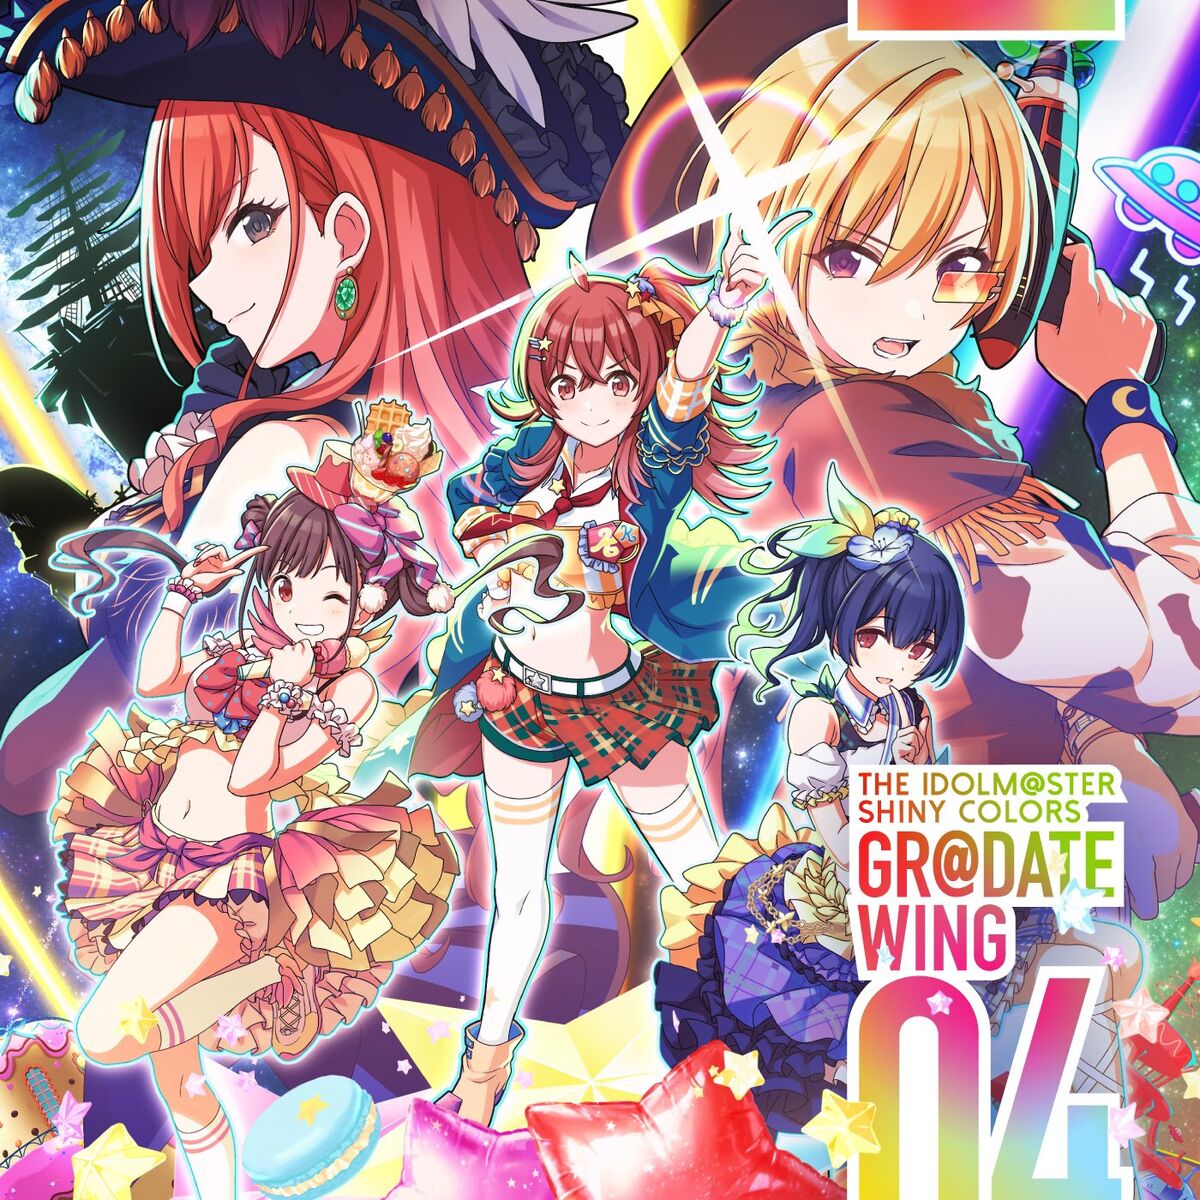 THE IDOLM@STER SHINY COLORS GR@DATE WING 04 - Shinycolors Wiki